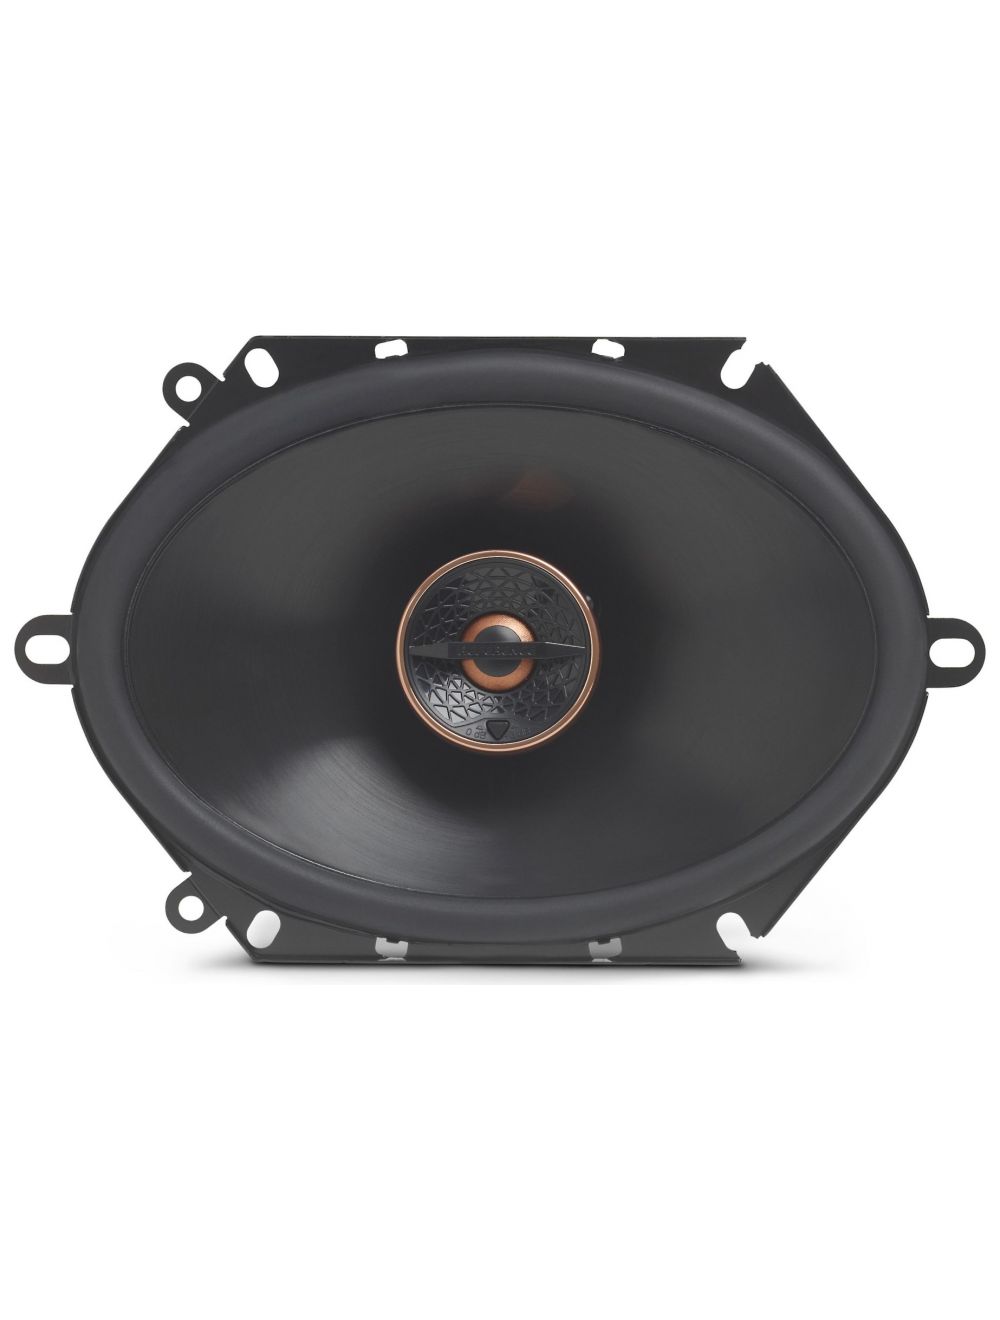 Infinity Reference REF-8632CFX - 6x8 Two-way car audio speaker (REF8632)